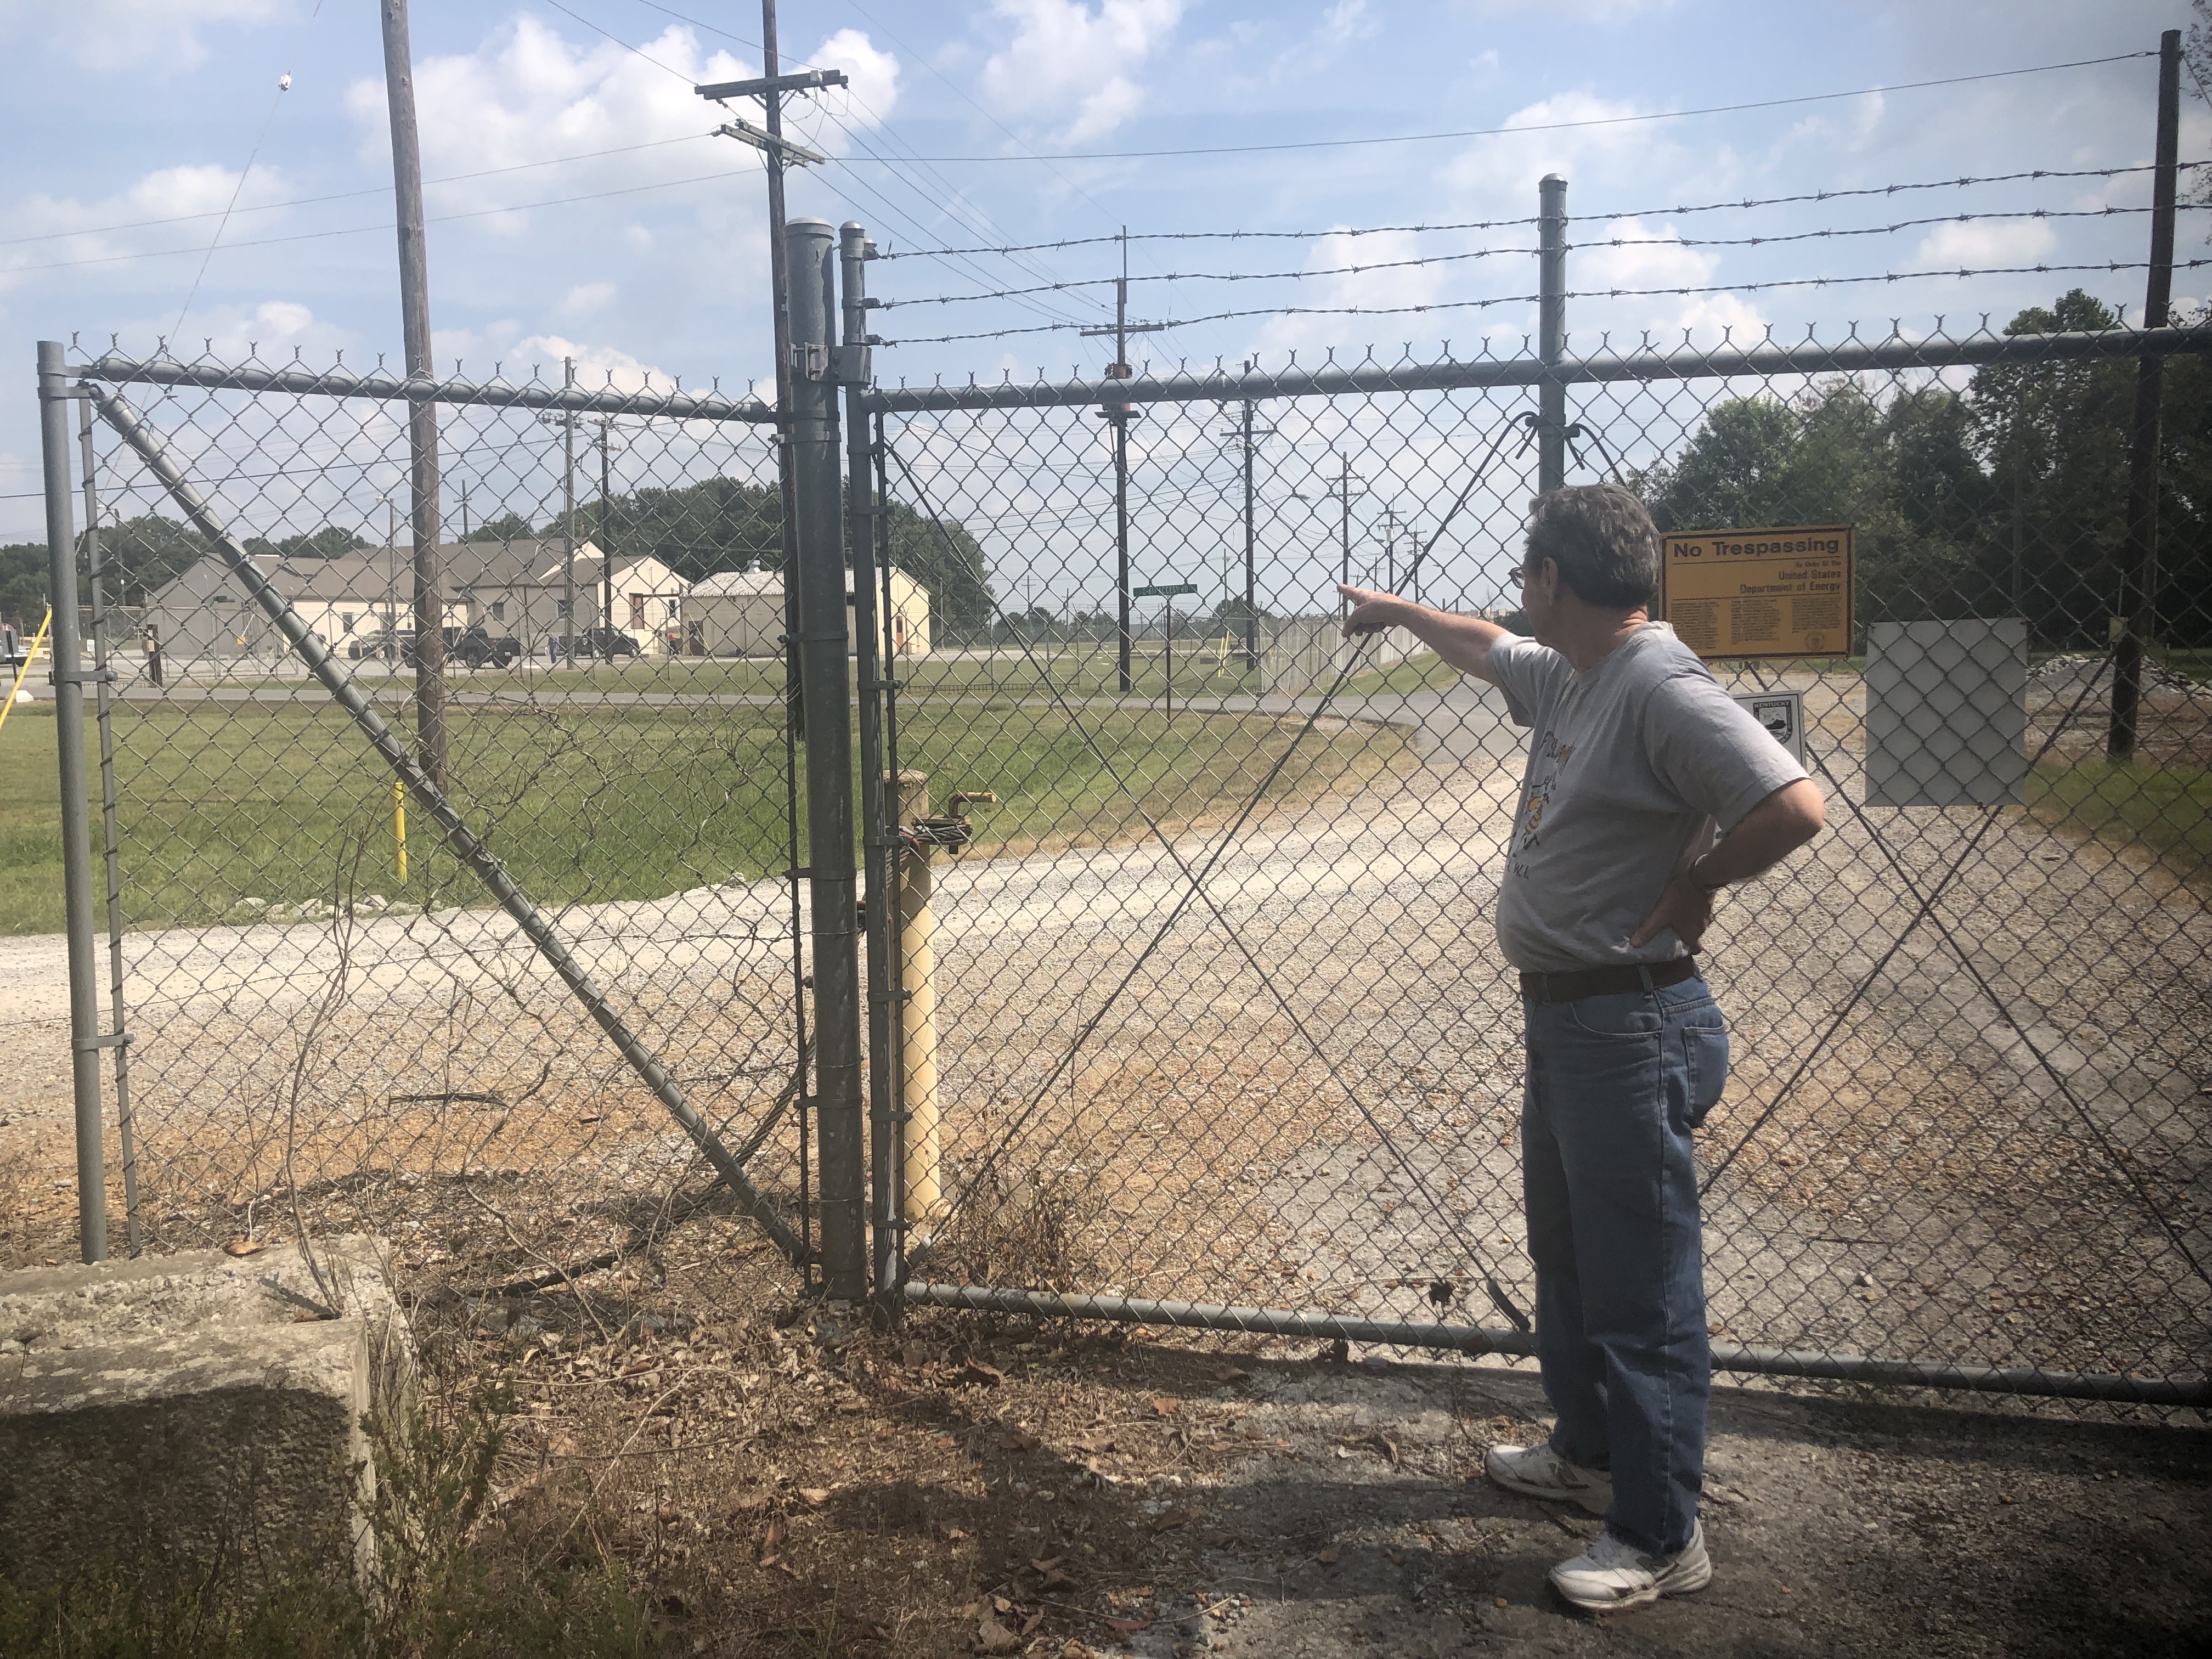 Greg Landhorff, former utilities worker at the Paducah Gaseous Diffusion Plant, stand in the West Kentucky Wildlife Management Area. He is pointing and looking through the fence line at the water treatment center where he used to work.